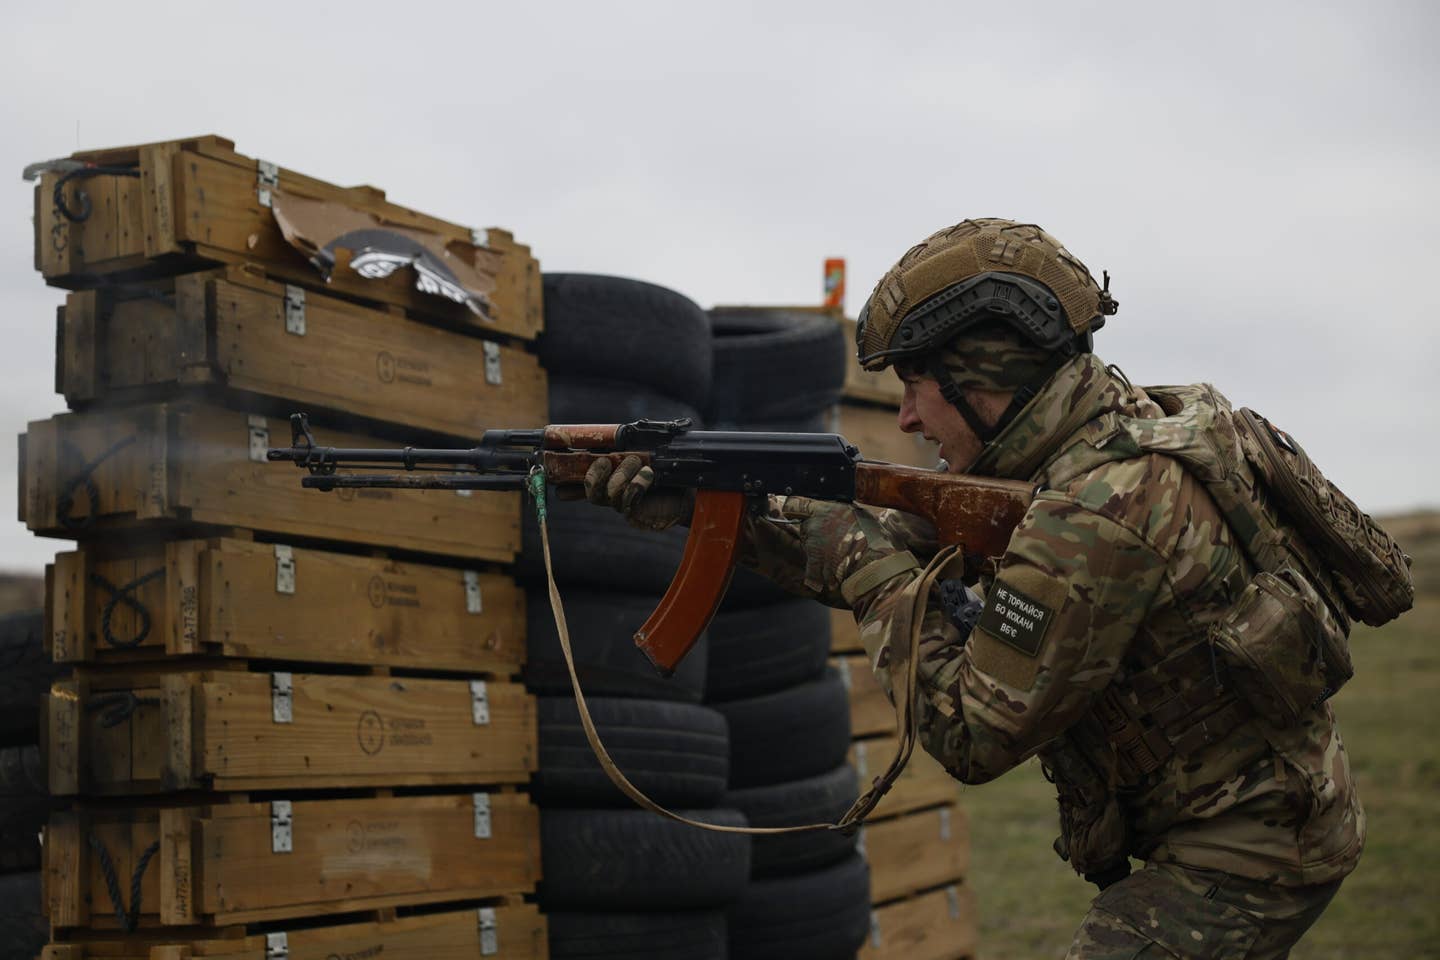 A Ukrainian soldier practices tactical and live-fire exercises on the training ground on November 30, 2023, in the Donetsk region, eastern Ukraine. <em>Photo by Roman Chop/Global Images Ukraine via Getty Images</em>